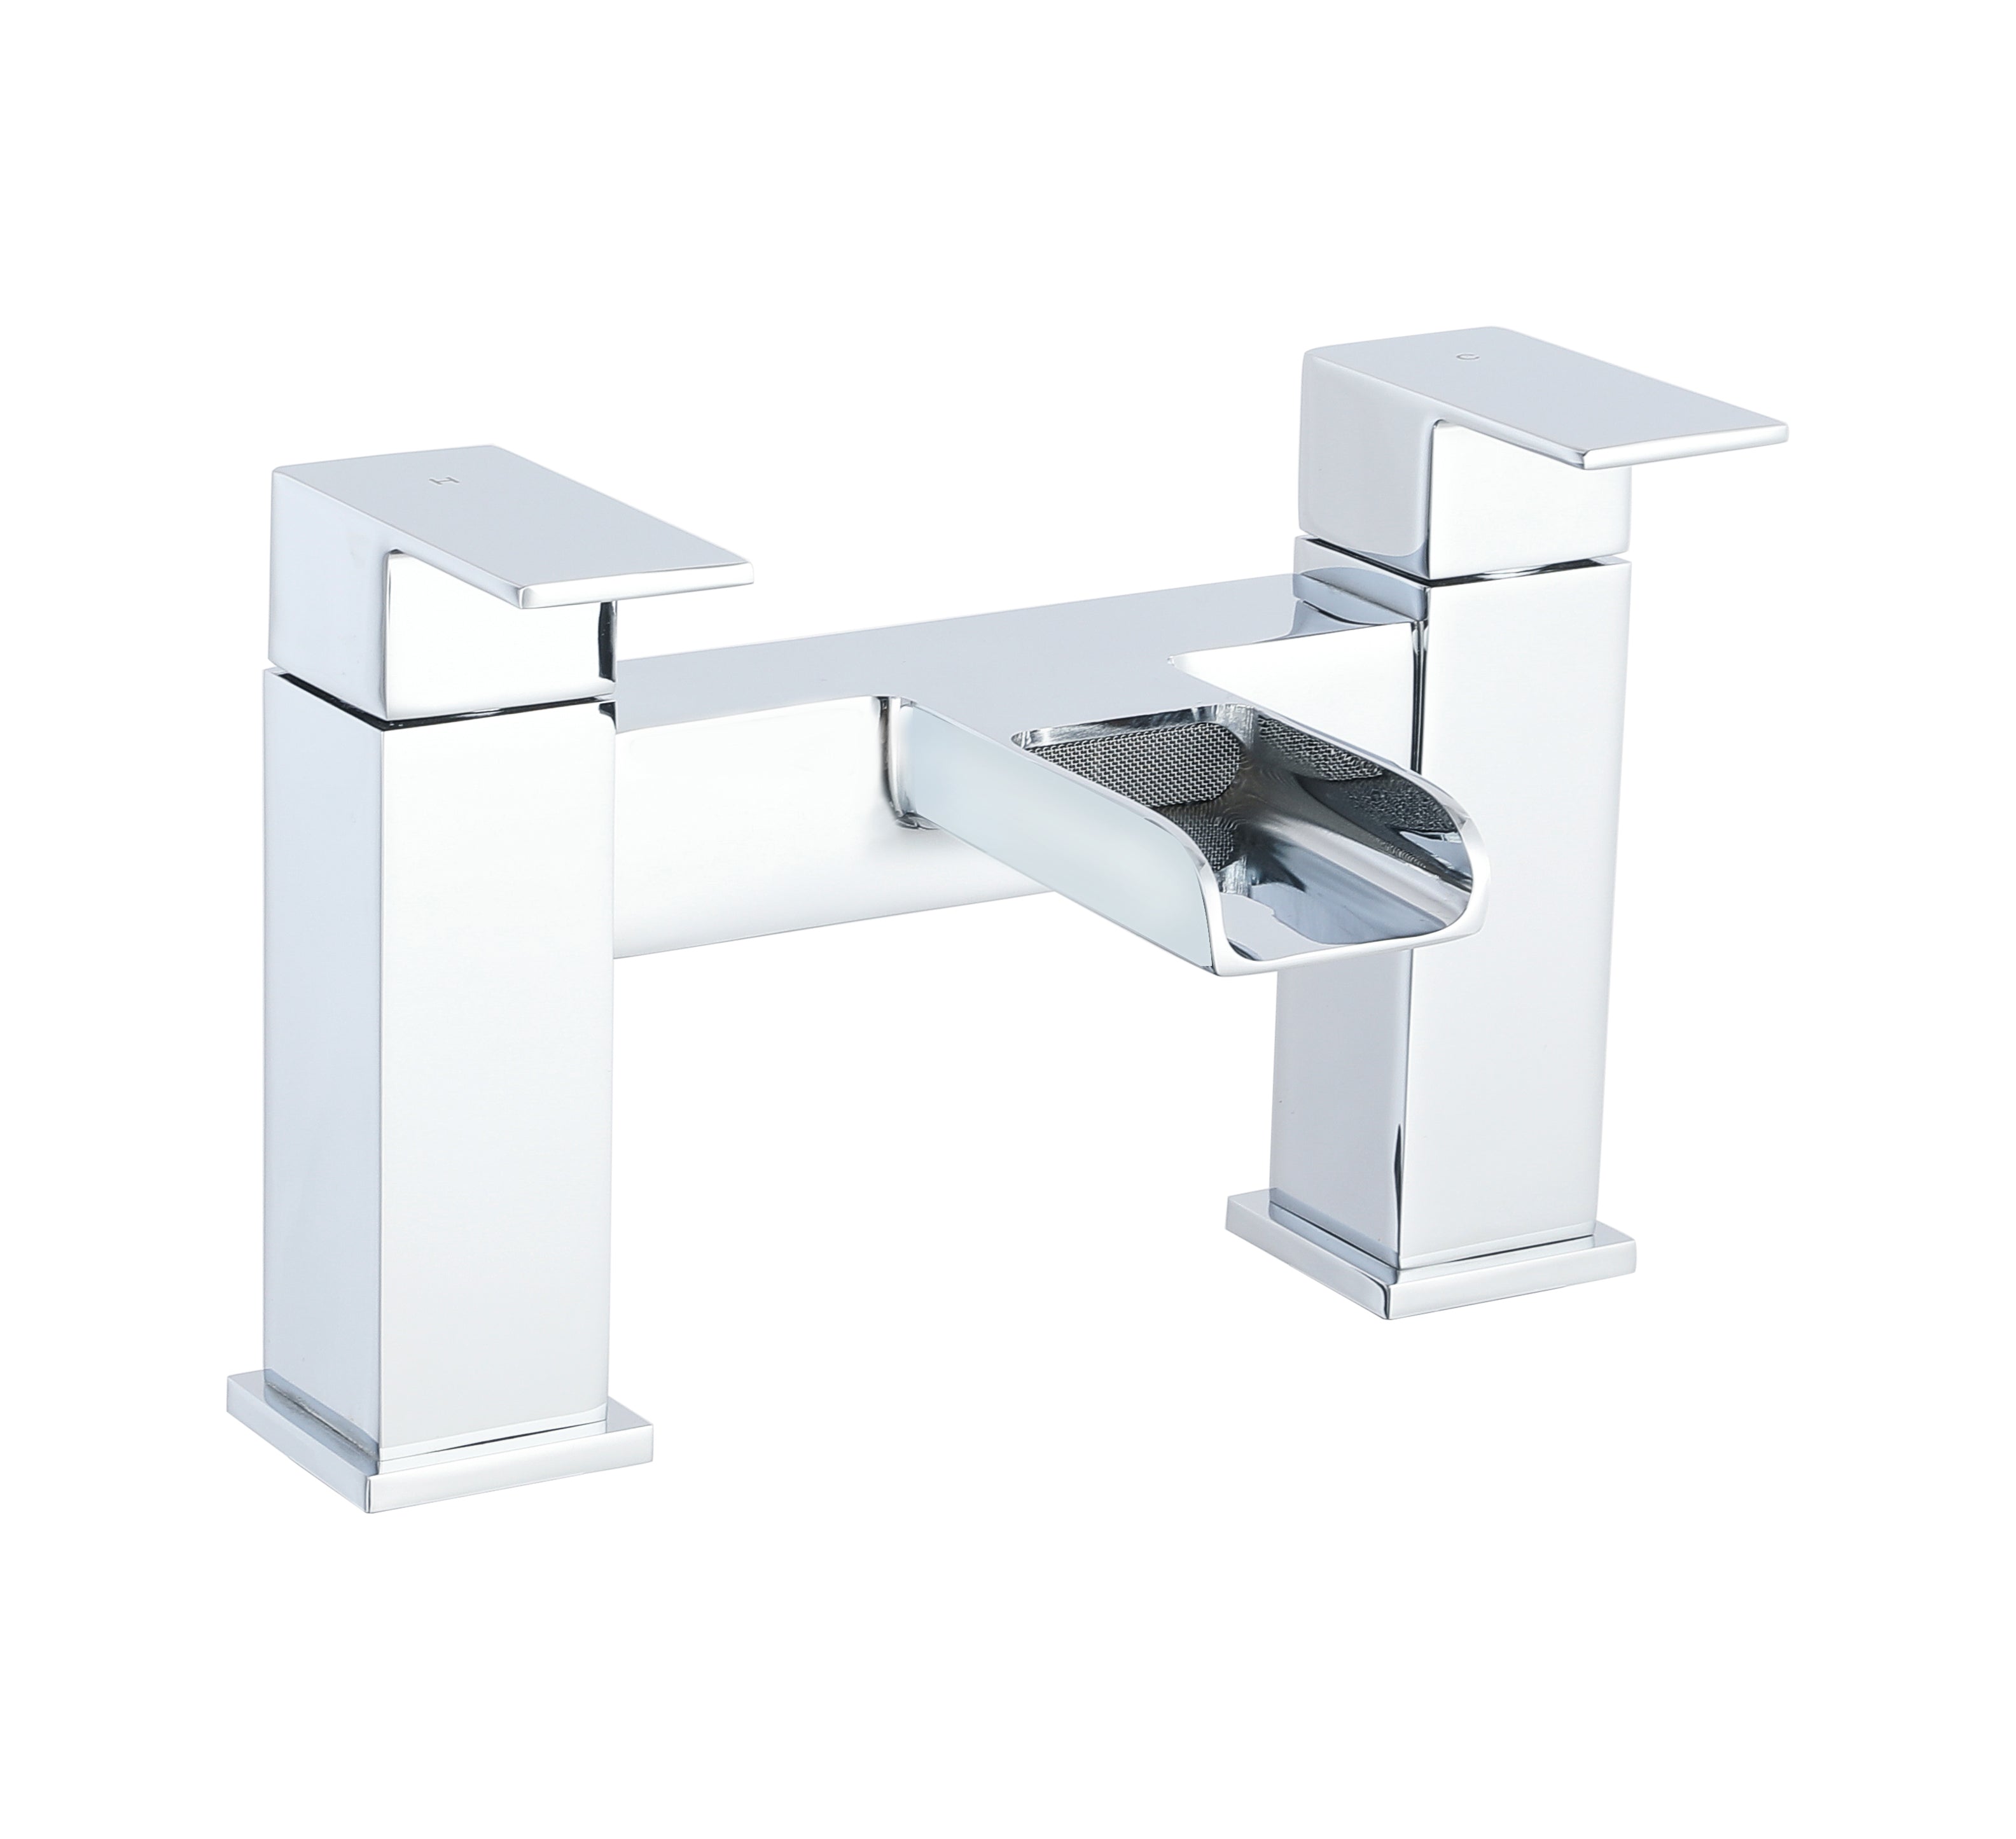 Stylish Kelvin Bath Filler in chrome finish, perfect for contemporary bathrooms. Enhance your bathroom with this modern bath tap featuring easy-to-use lever handles and a sleek design. Available now at Bathroom4Less UK.